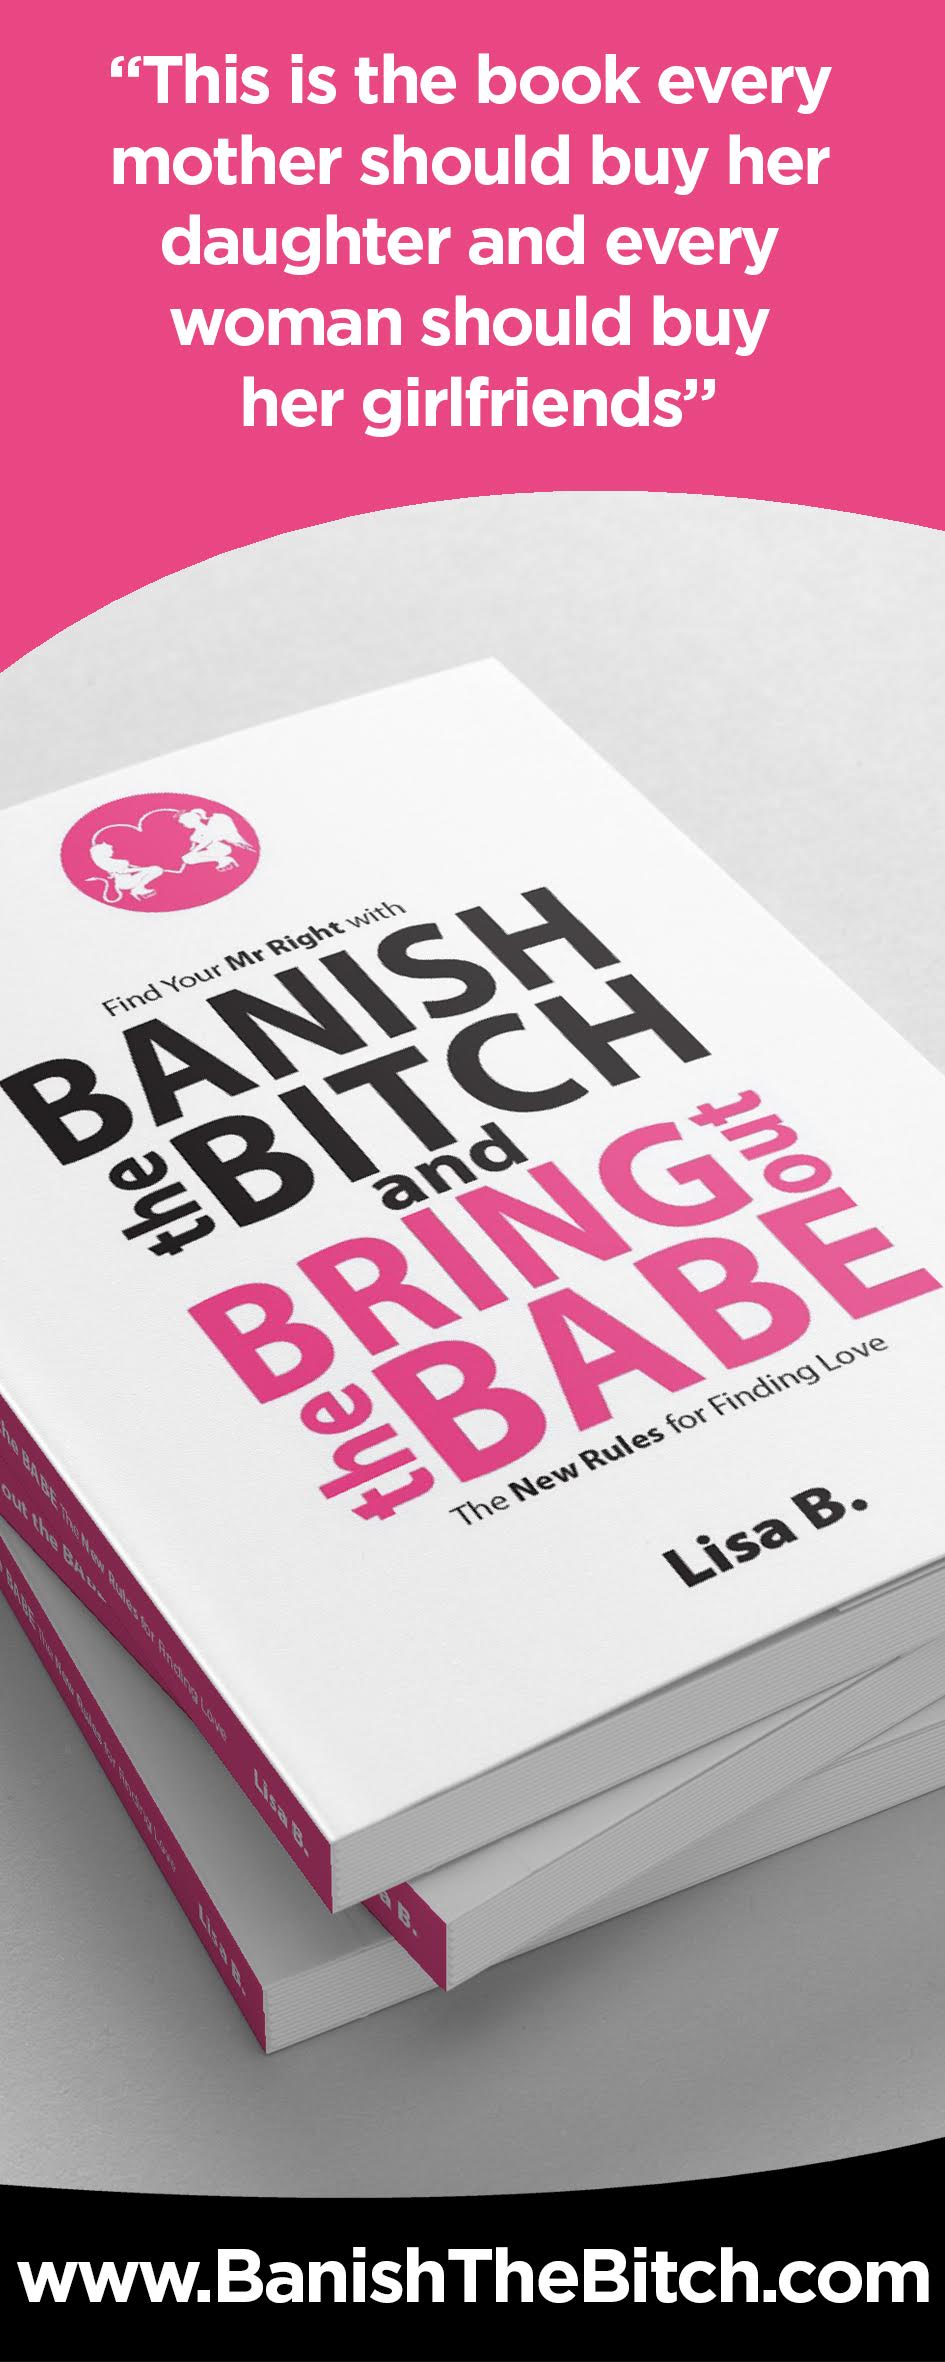 Banish the Bitch and Bring Out the Babe Banner